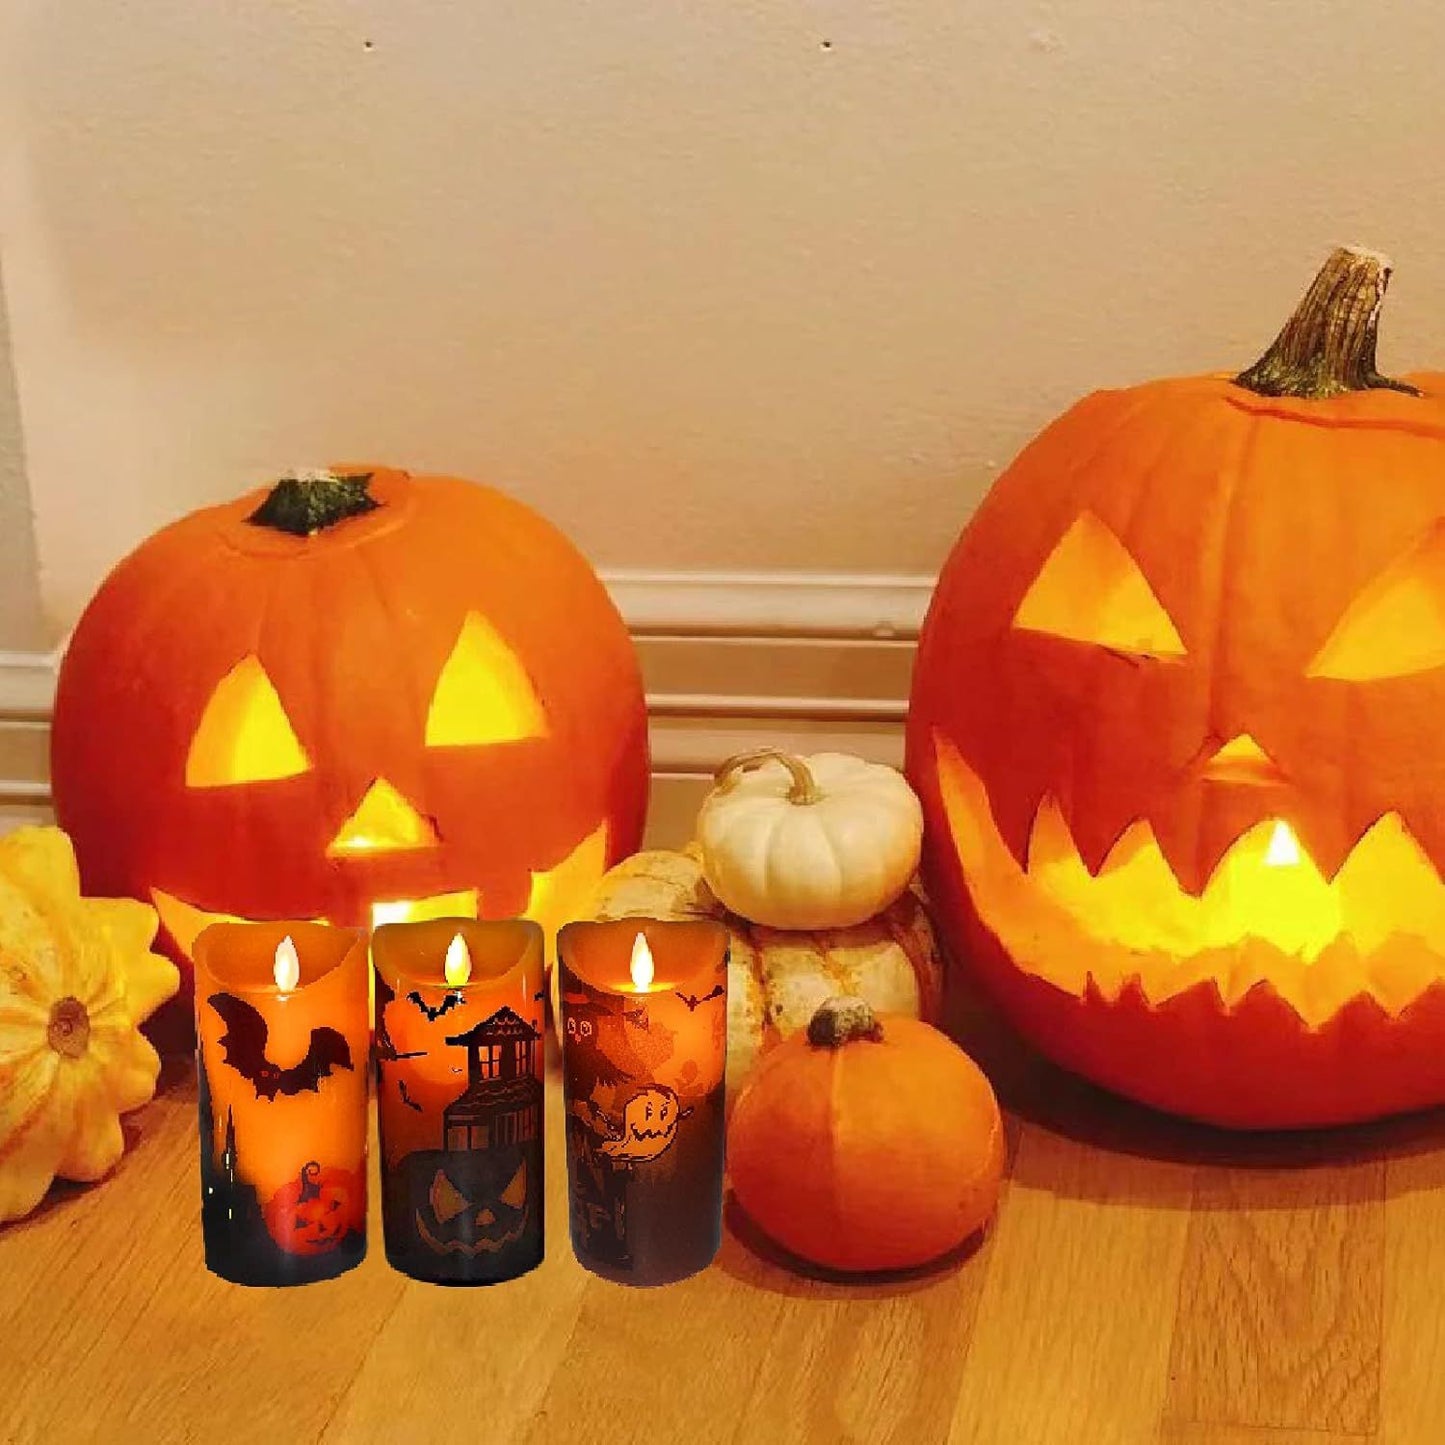 Geharty Halloween LED Flickering Flameless Candles, Moving Flame-Timer & Remote